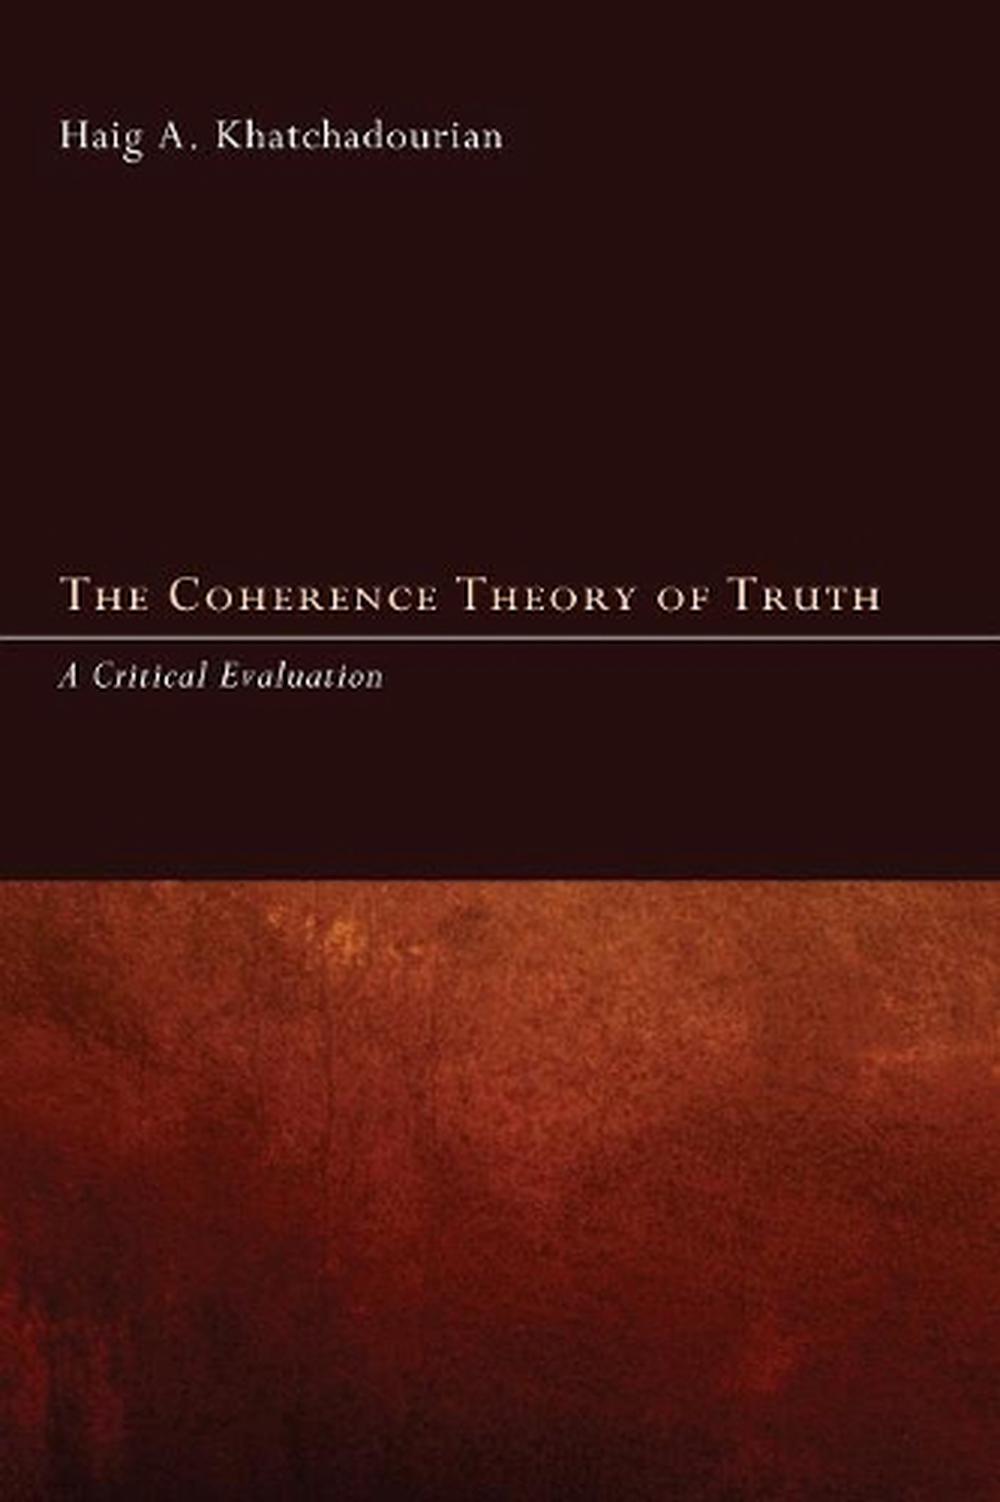 coherence theory of truth example